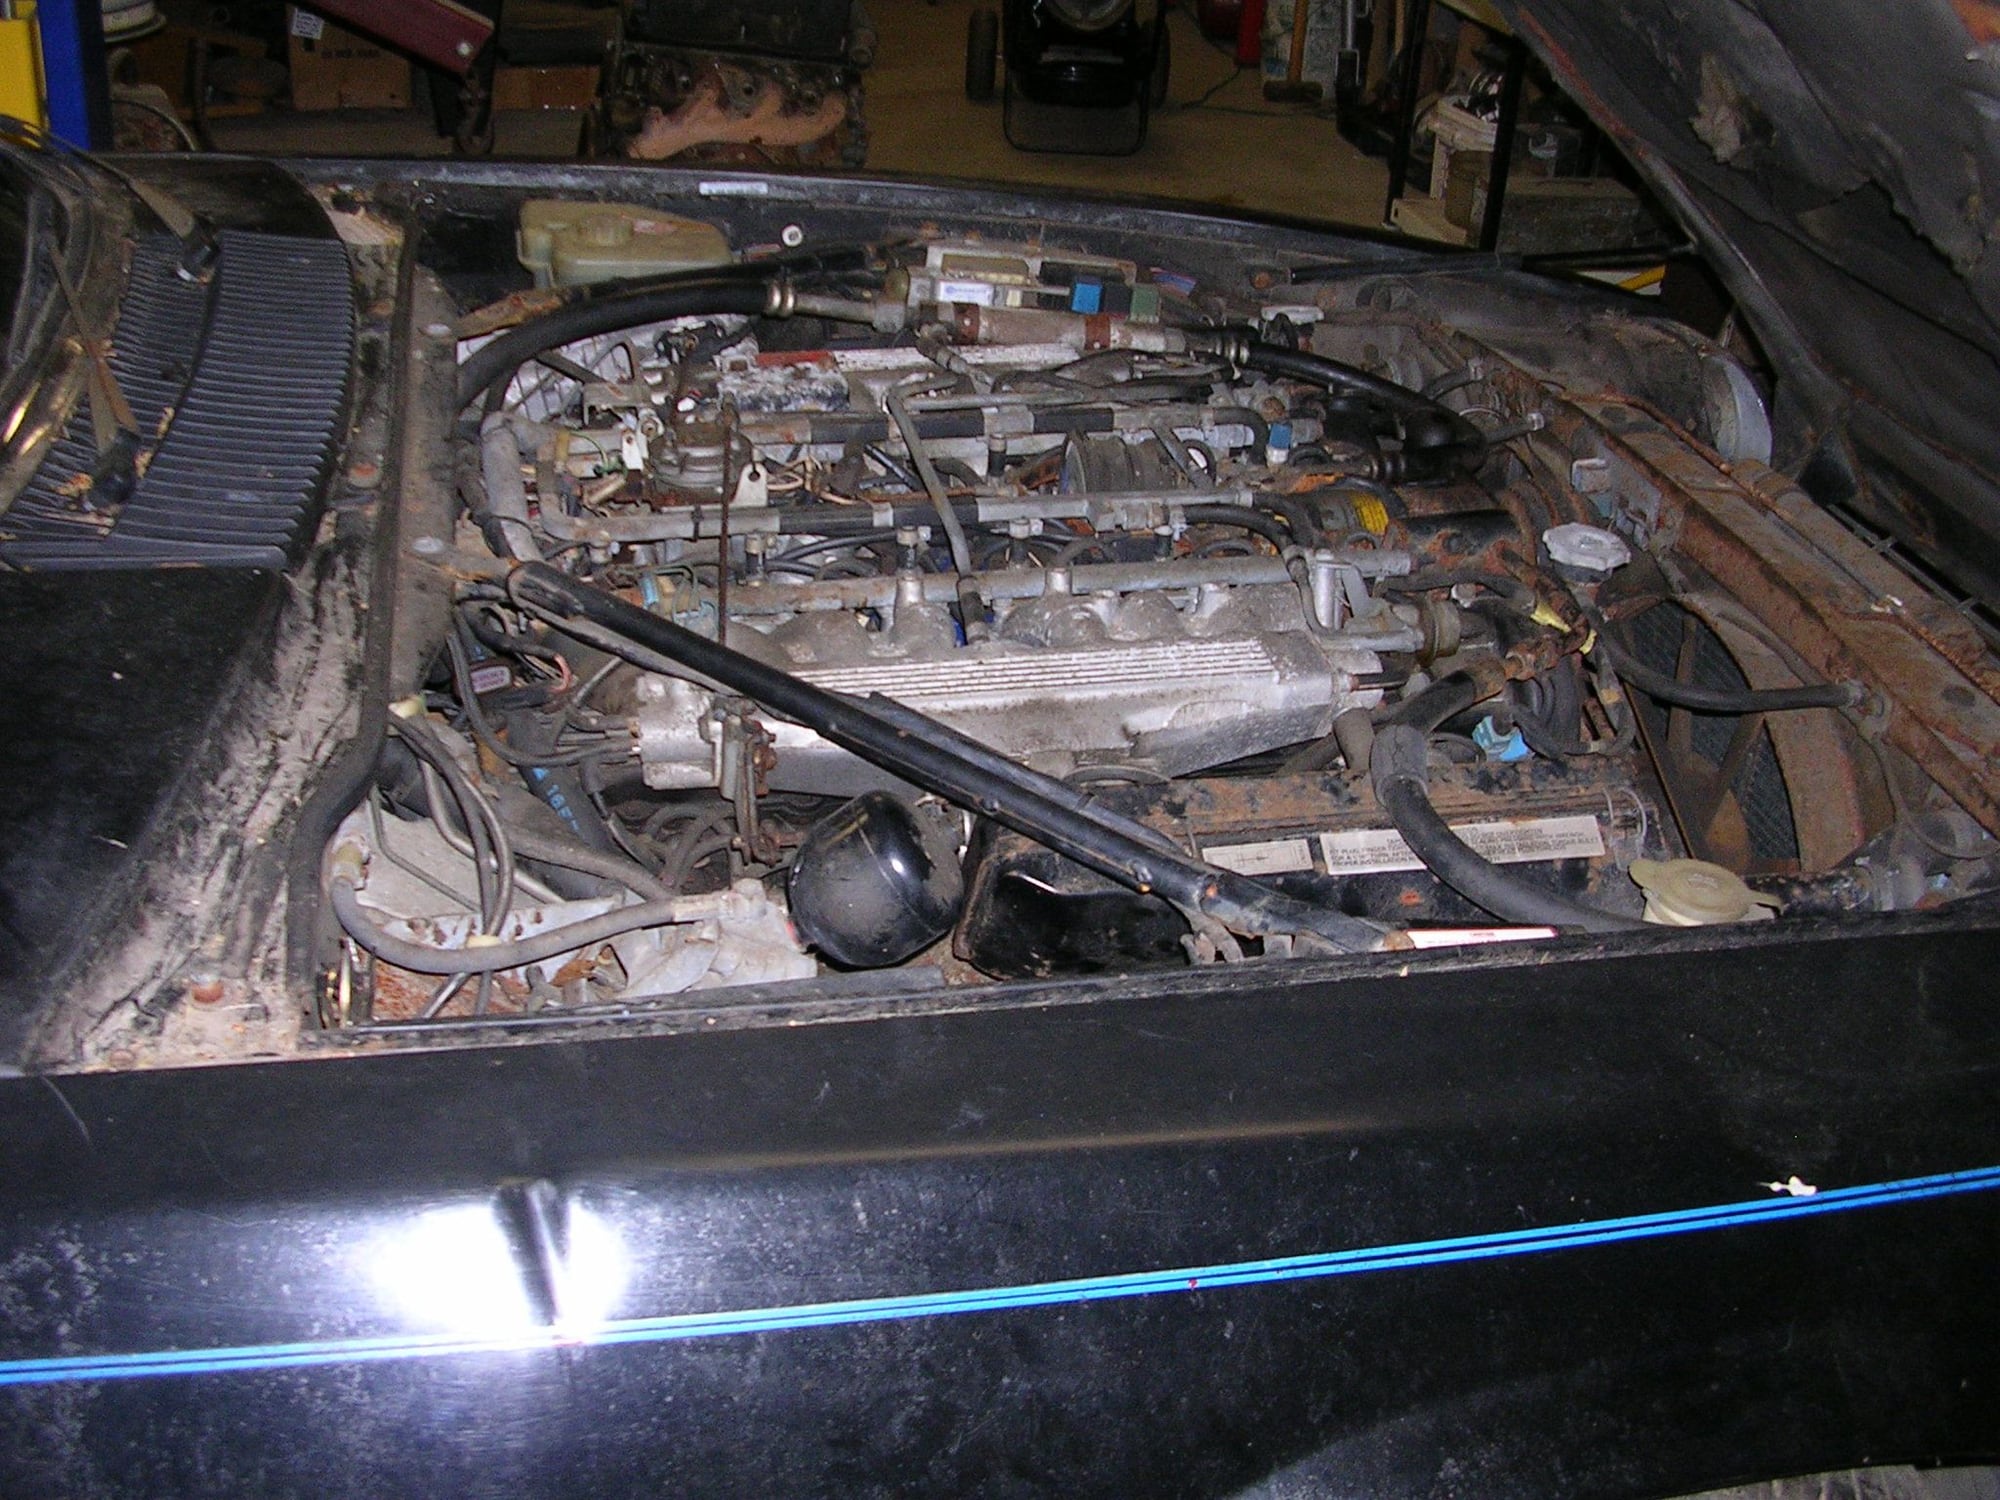 Engine - Complete - 5.3 HE V12 and TH400 trans - Used - 1981 to 1992 Jaguar XJS - Tuckerman, AR 72473, United States